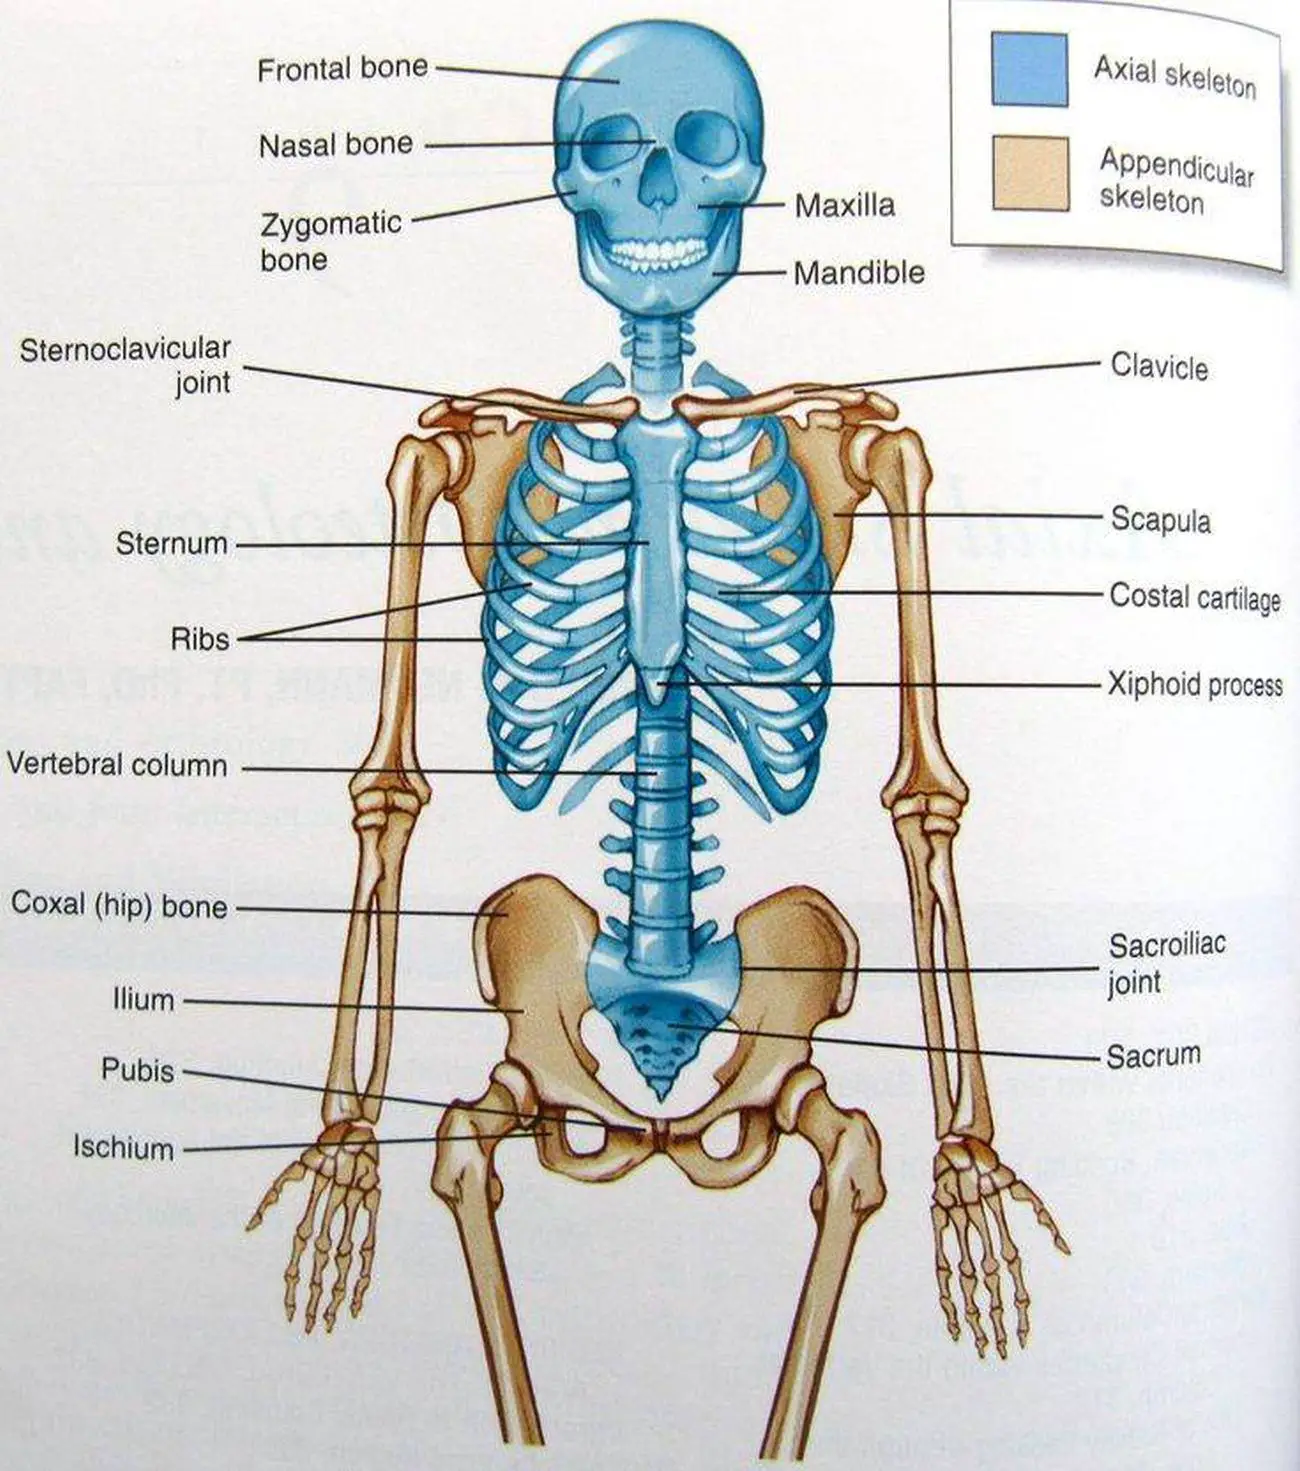 Pictures Of Axial Skeleton